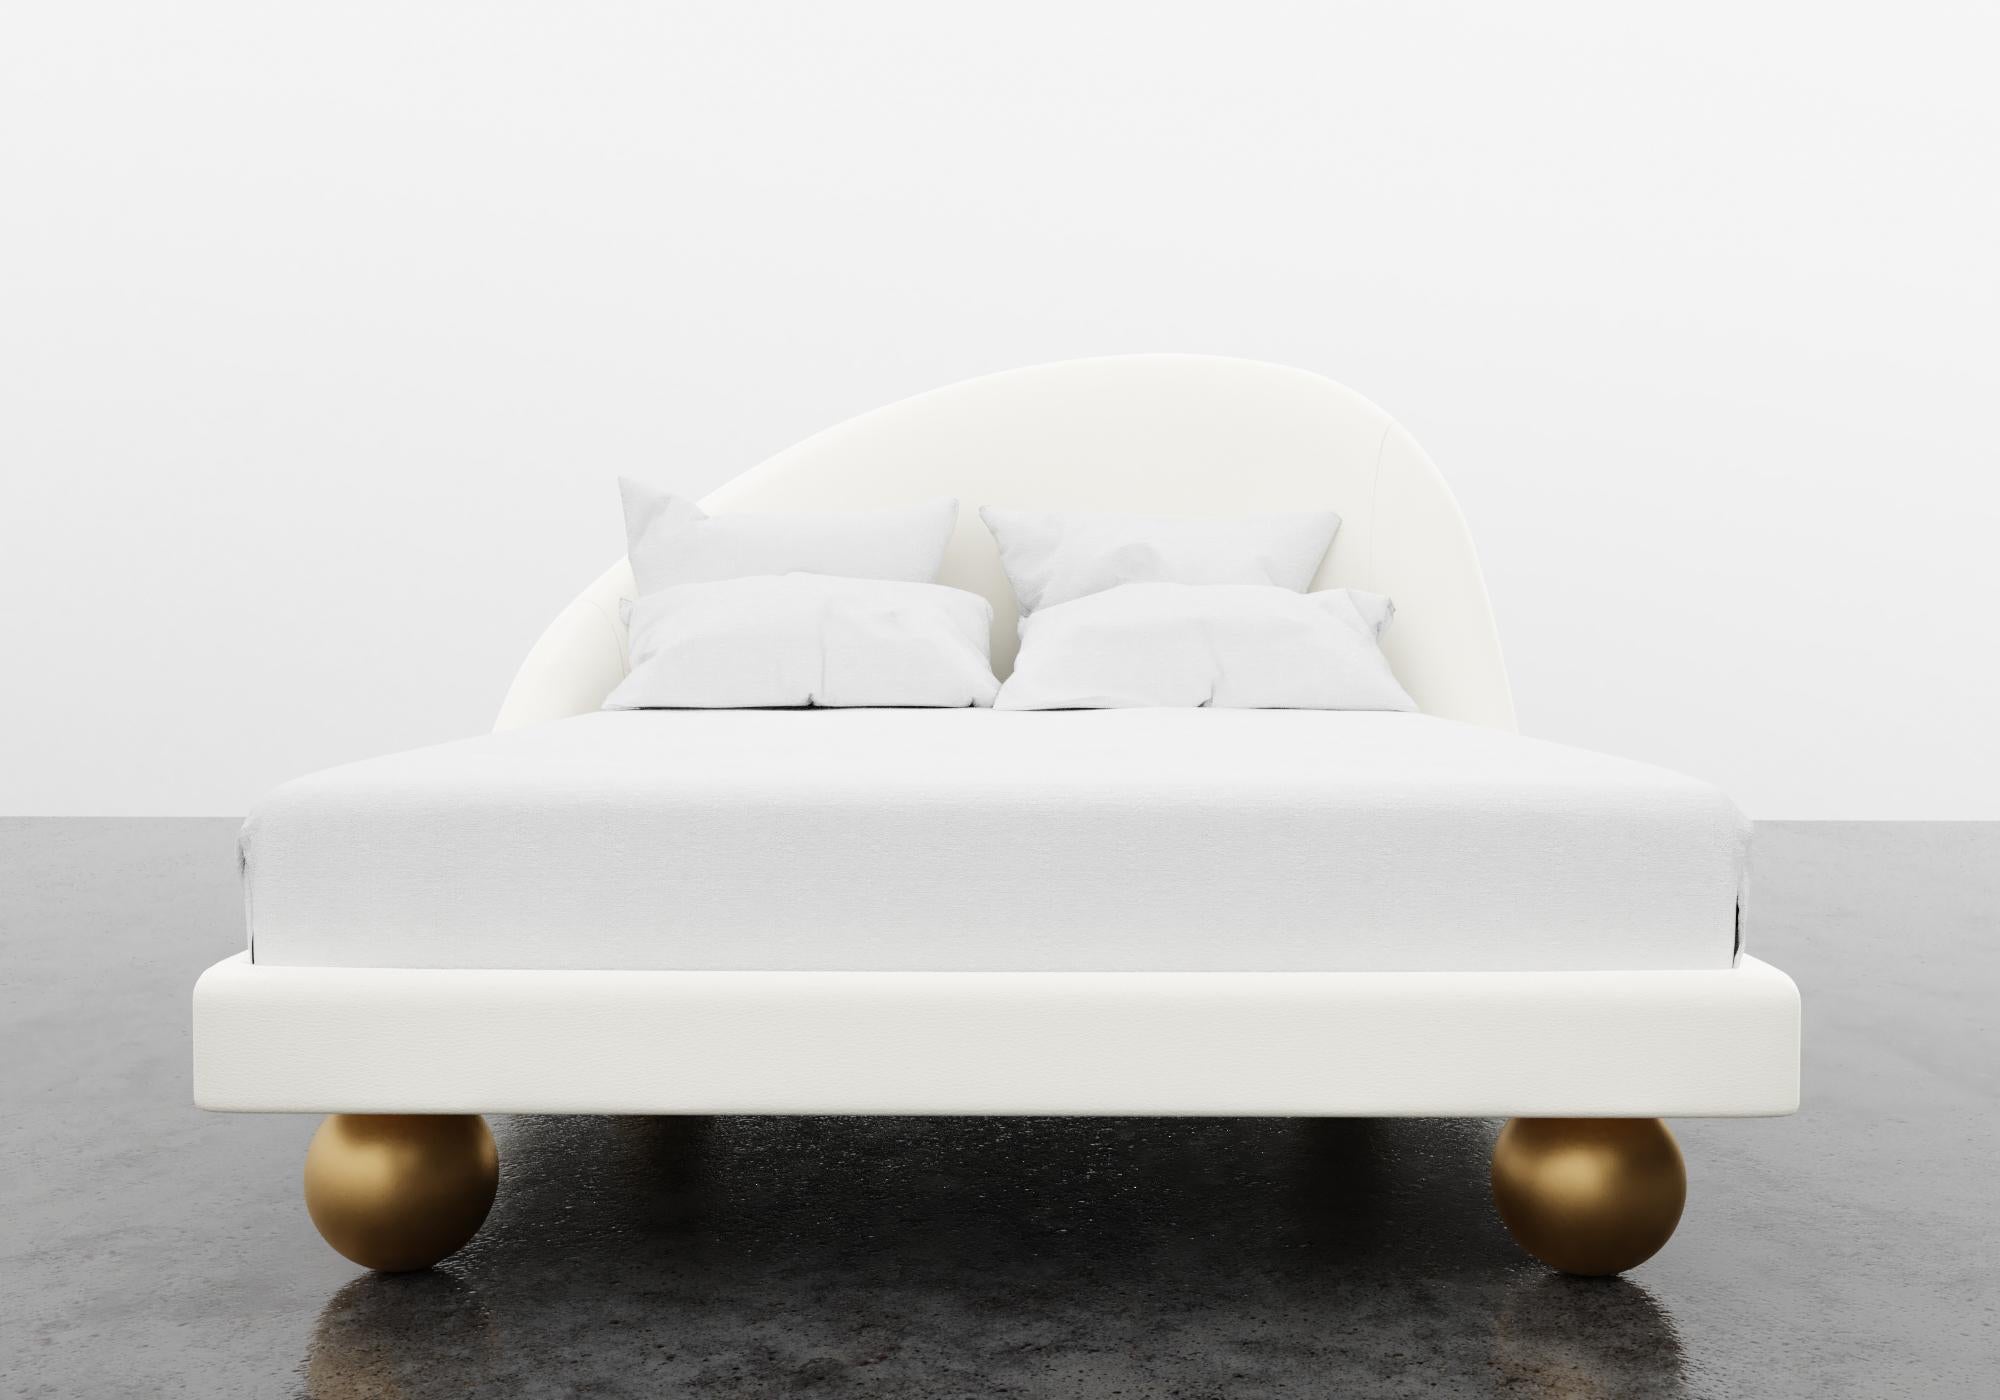 The Sandrine bed features a modern asymmetrical upholstered headboard and an upholstered platform base with round metal legs. COM will be used for fabric with Polished Bronze legs. CAD will be drawn to outline dimensions and receive customer